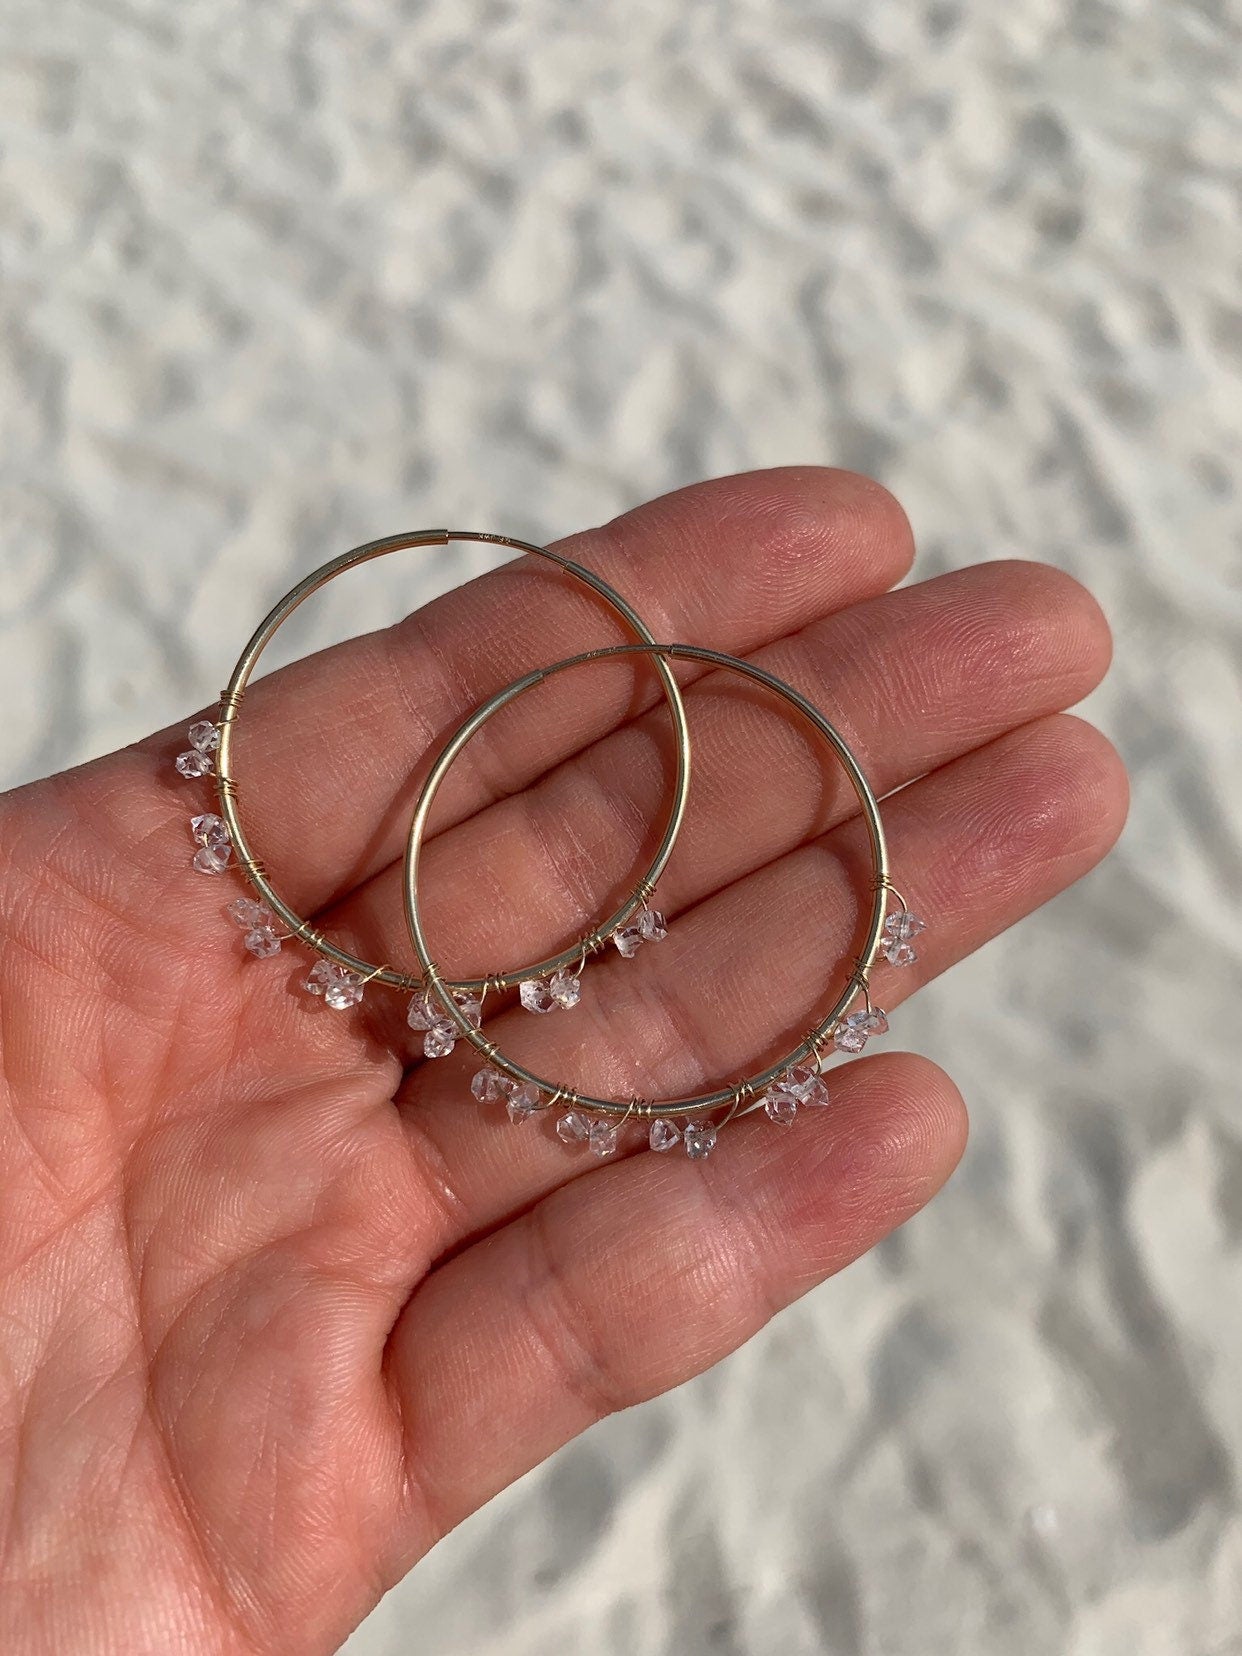 Herkimer diamond hoops (14kt gold-filled and sterling silver)